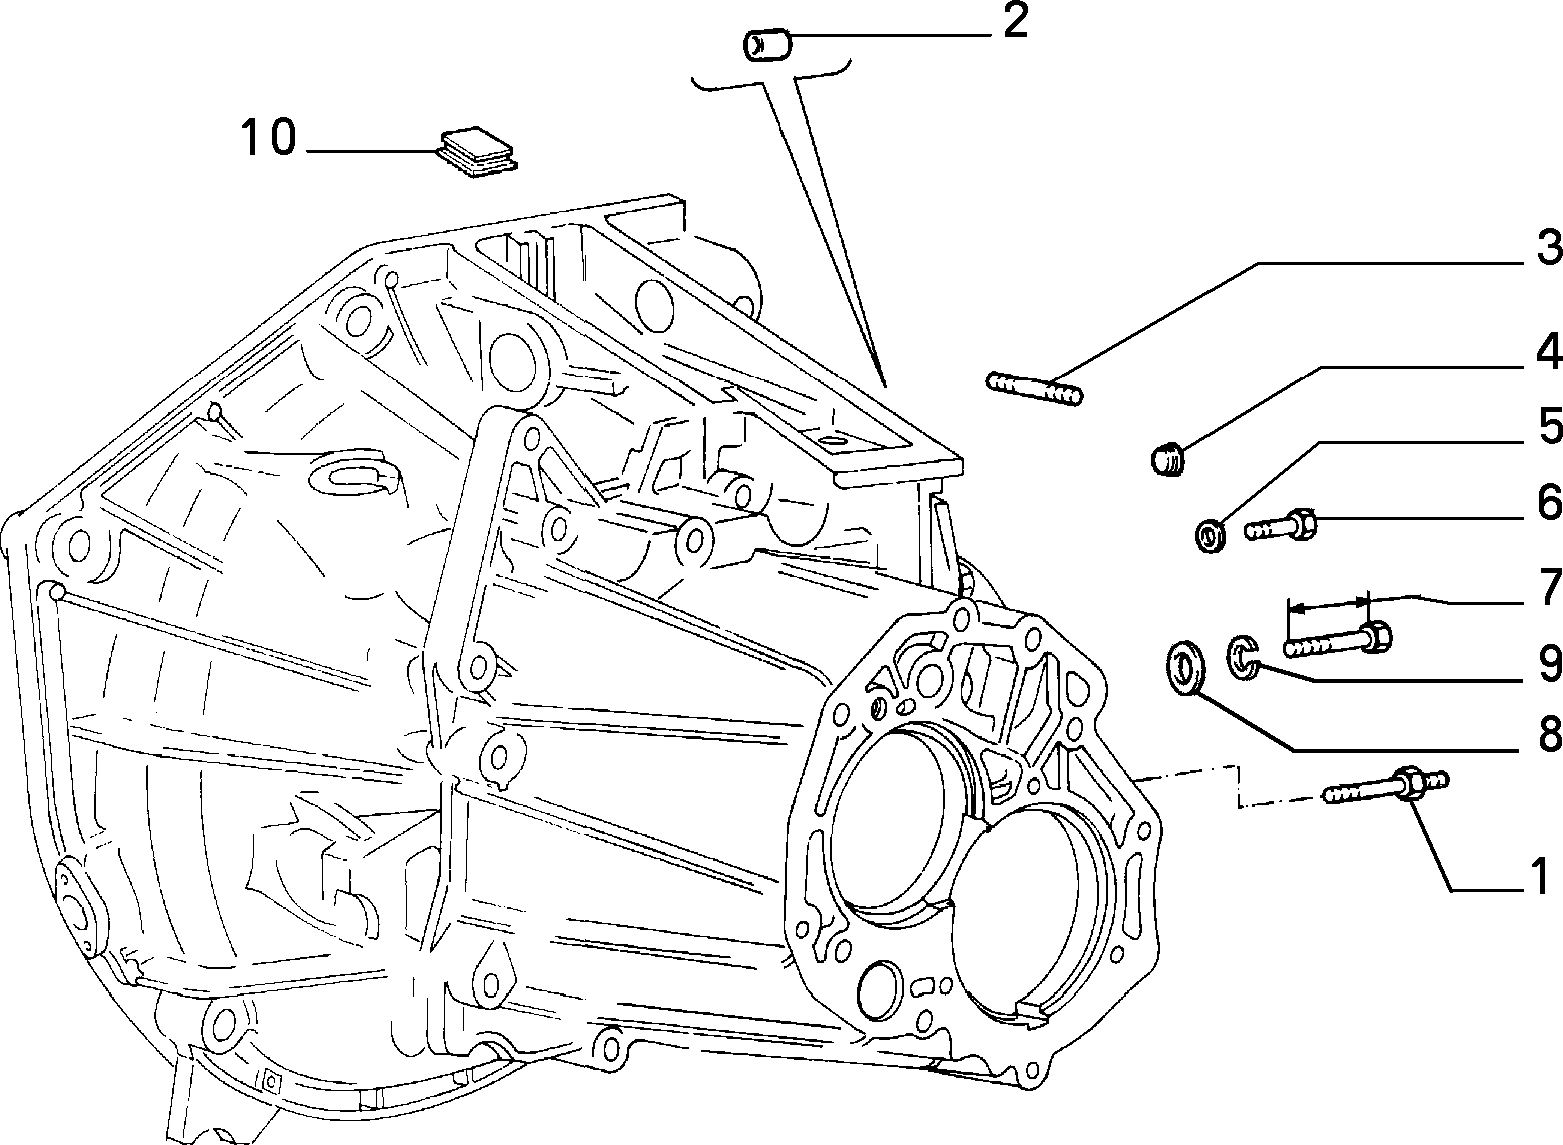 TRANSMISSION AND DIFFERENTIAL UNIT, CASING AND COVERS для Lancia THEMA THEMA BZ\DS R.88 (1988 - 1992)